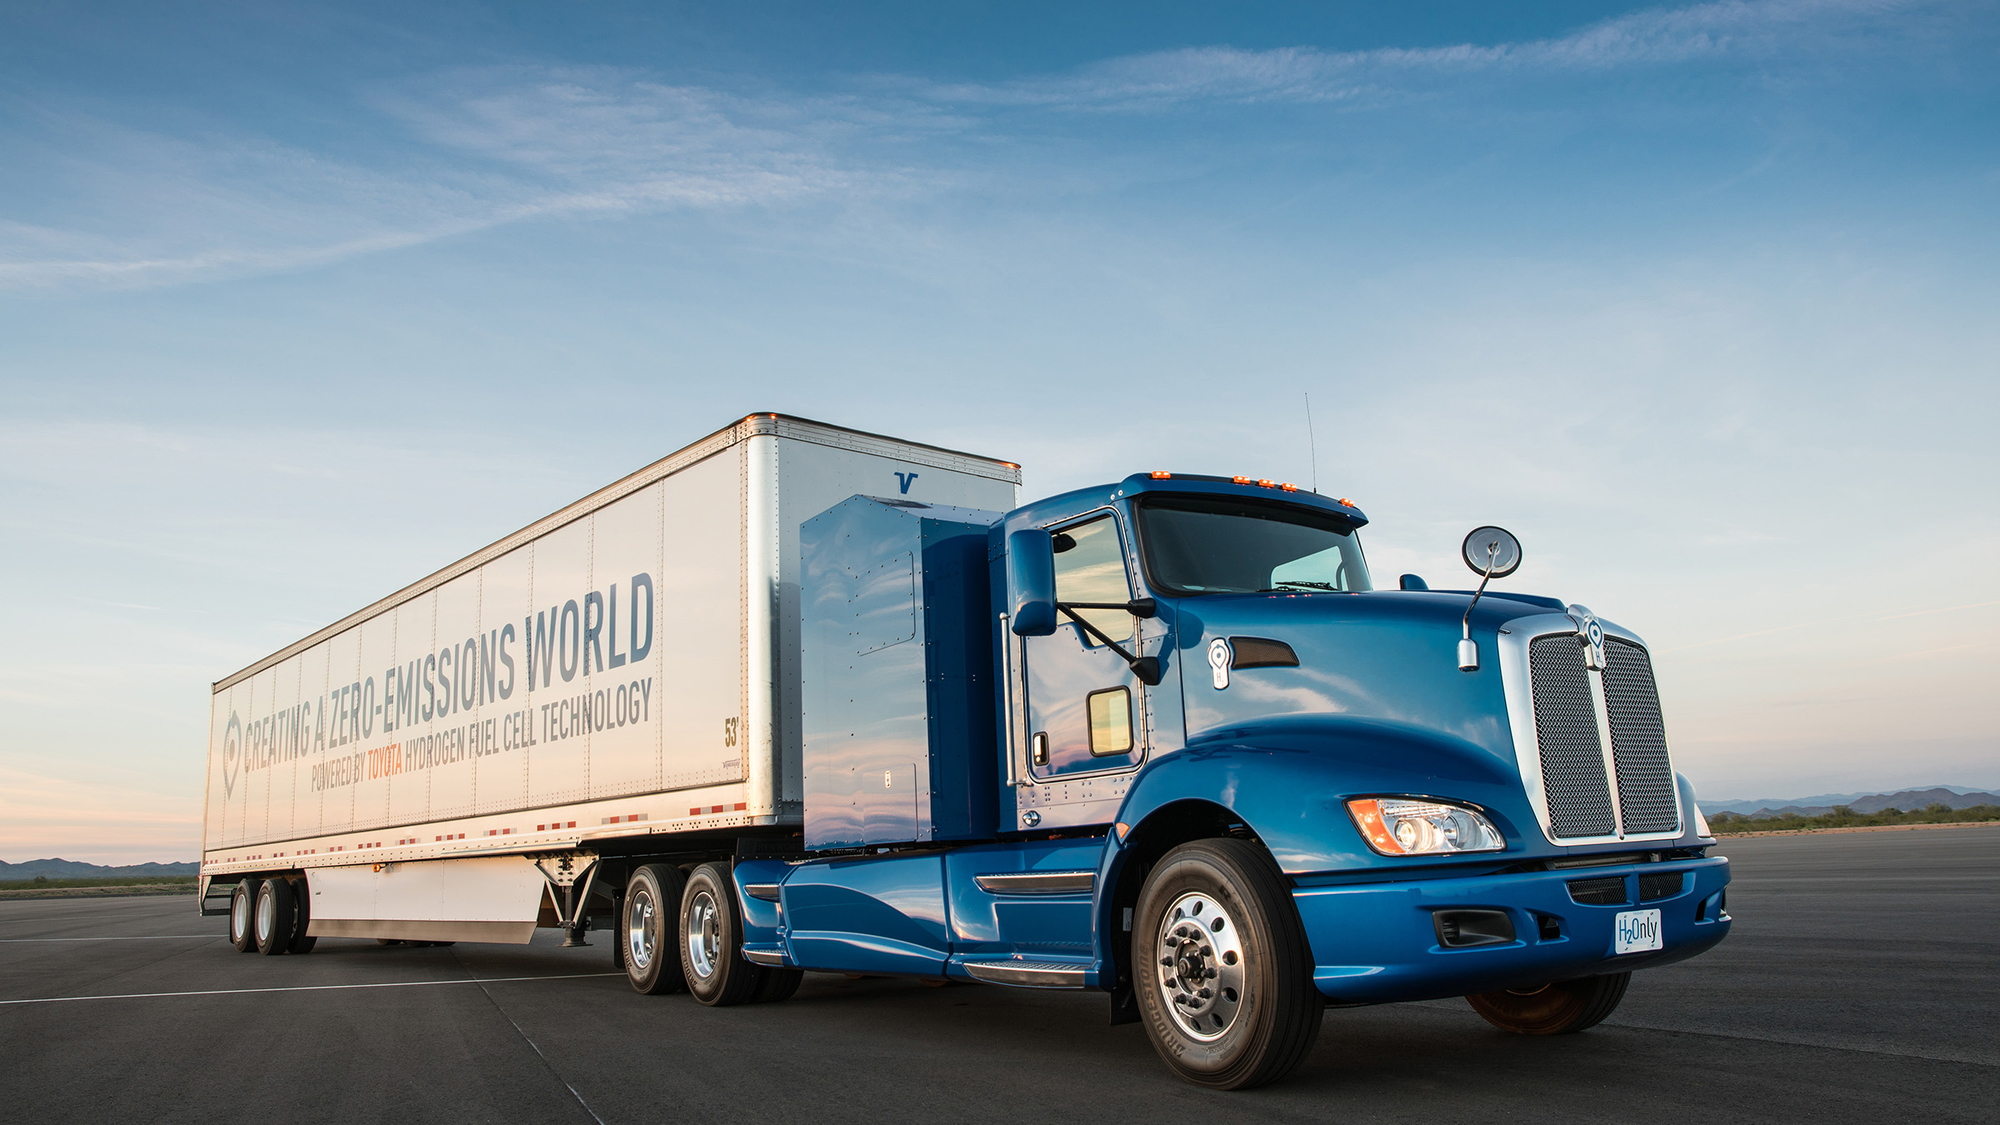 Toyota 'Project Portal' proof-of-concept hydrogen fuel-cell powered semi tractor, for Port of LA